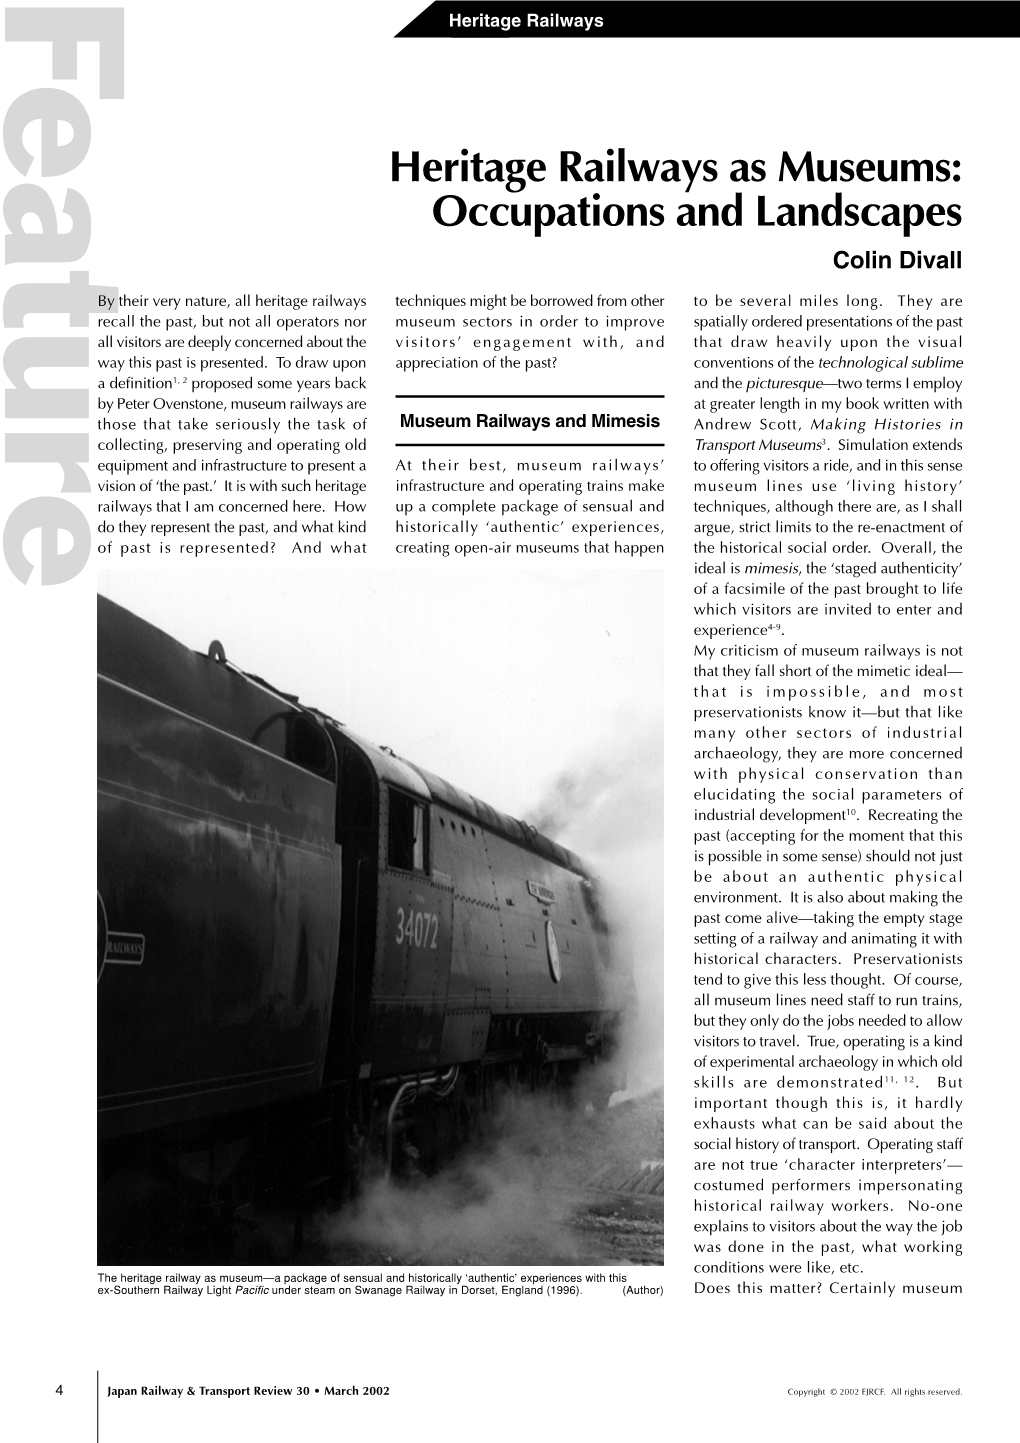 Heritage Railways As Museums: Occupations and Landscapes Colin Divall